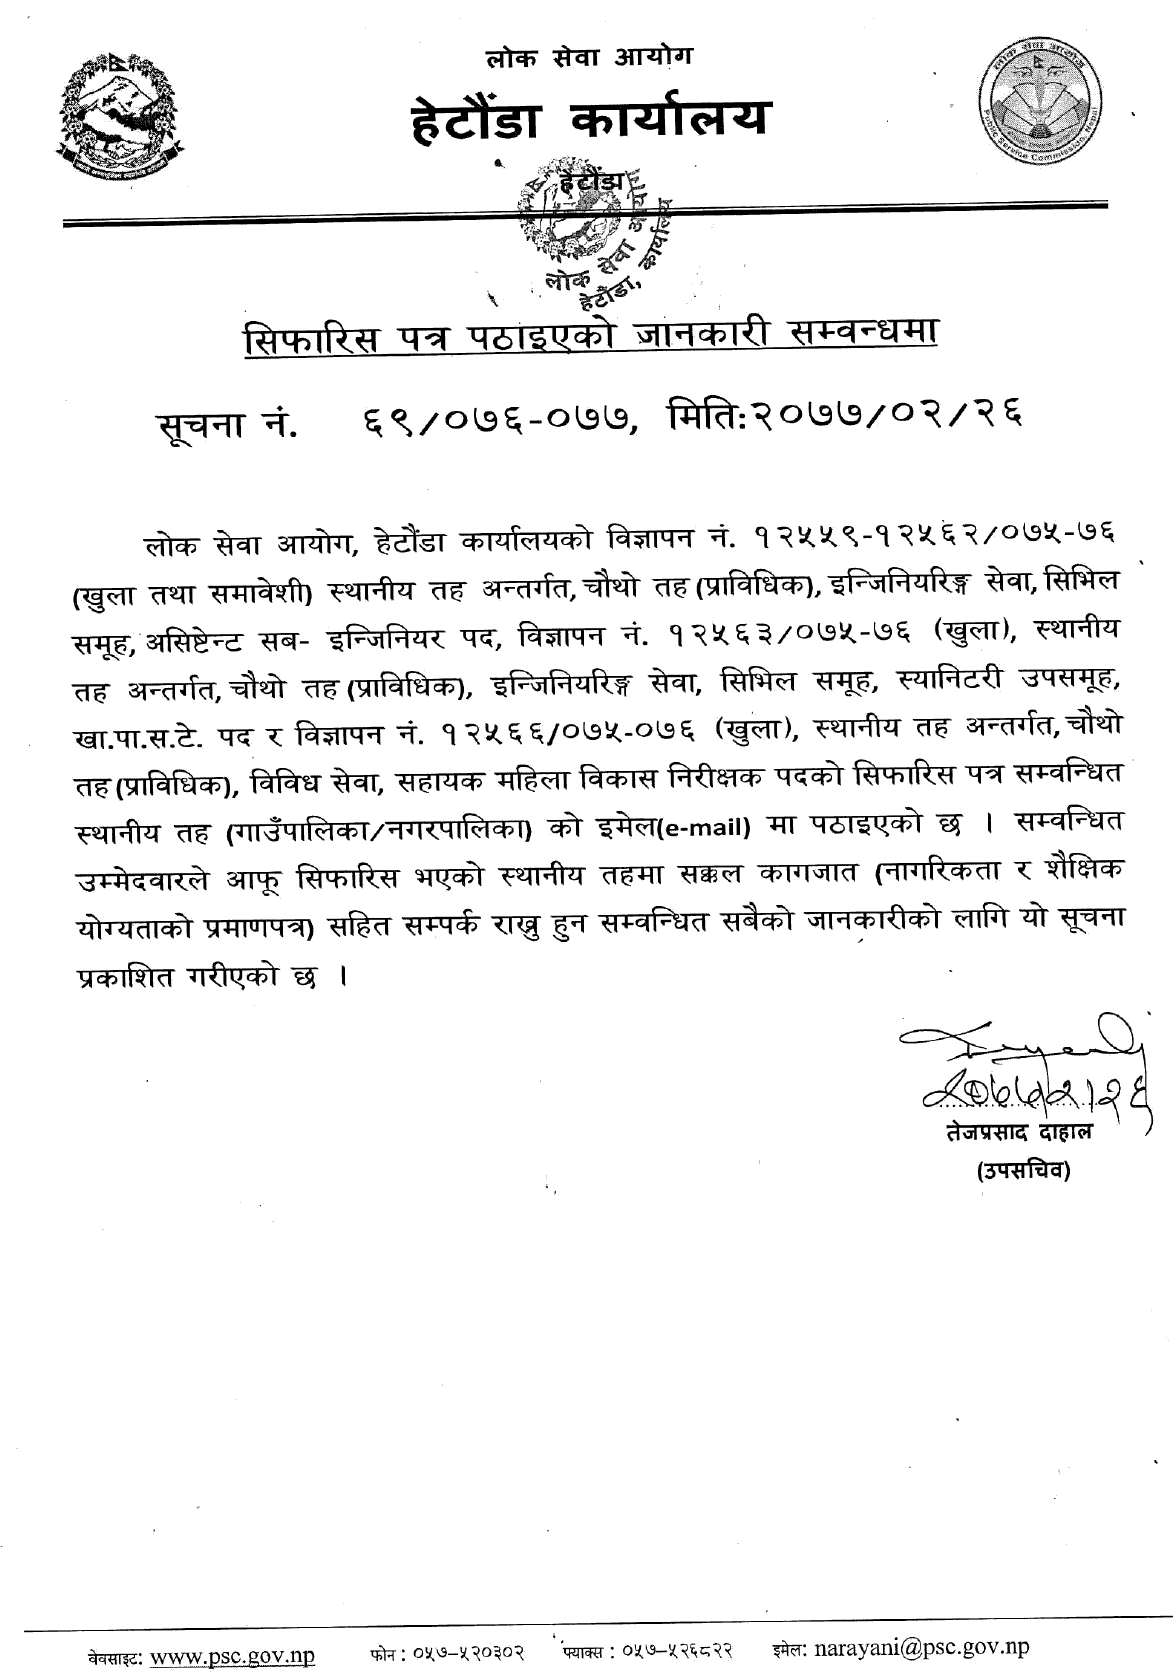 Lok Sewa Aayog Hetauda Notice for Recommendation of Local Level 4th Position